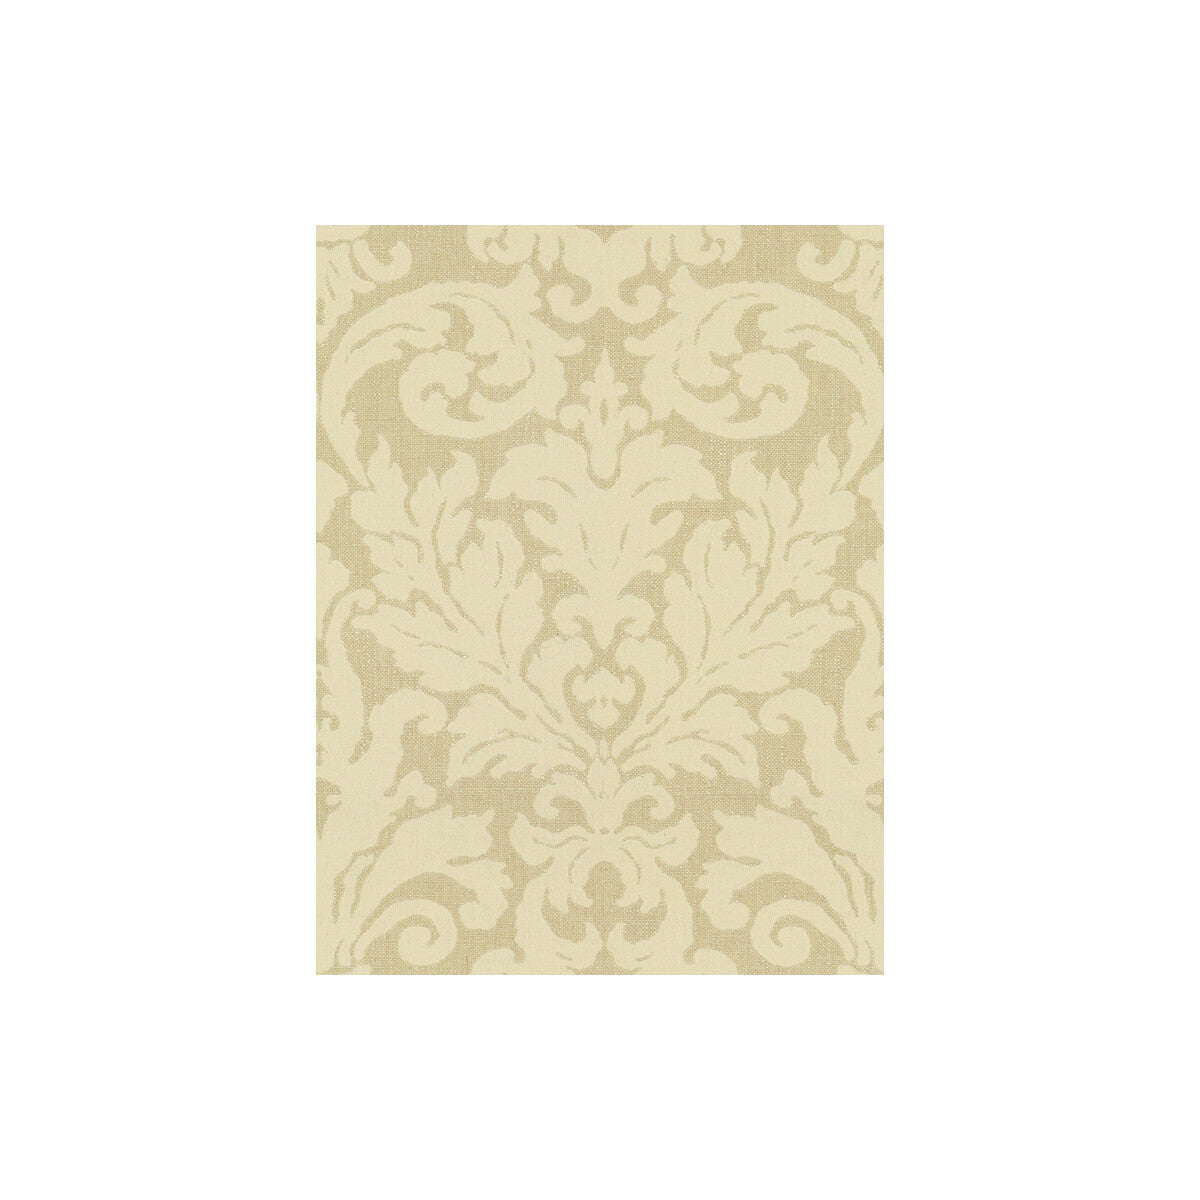 Sitapur fabric in linen color - pattern 32851.16.0 - by Kravet Design in the Barclay Butera II collection